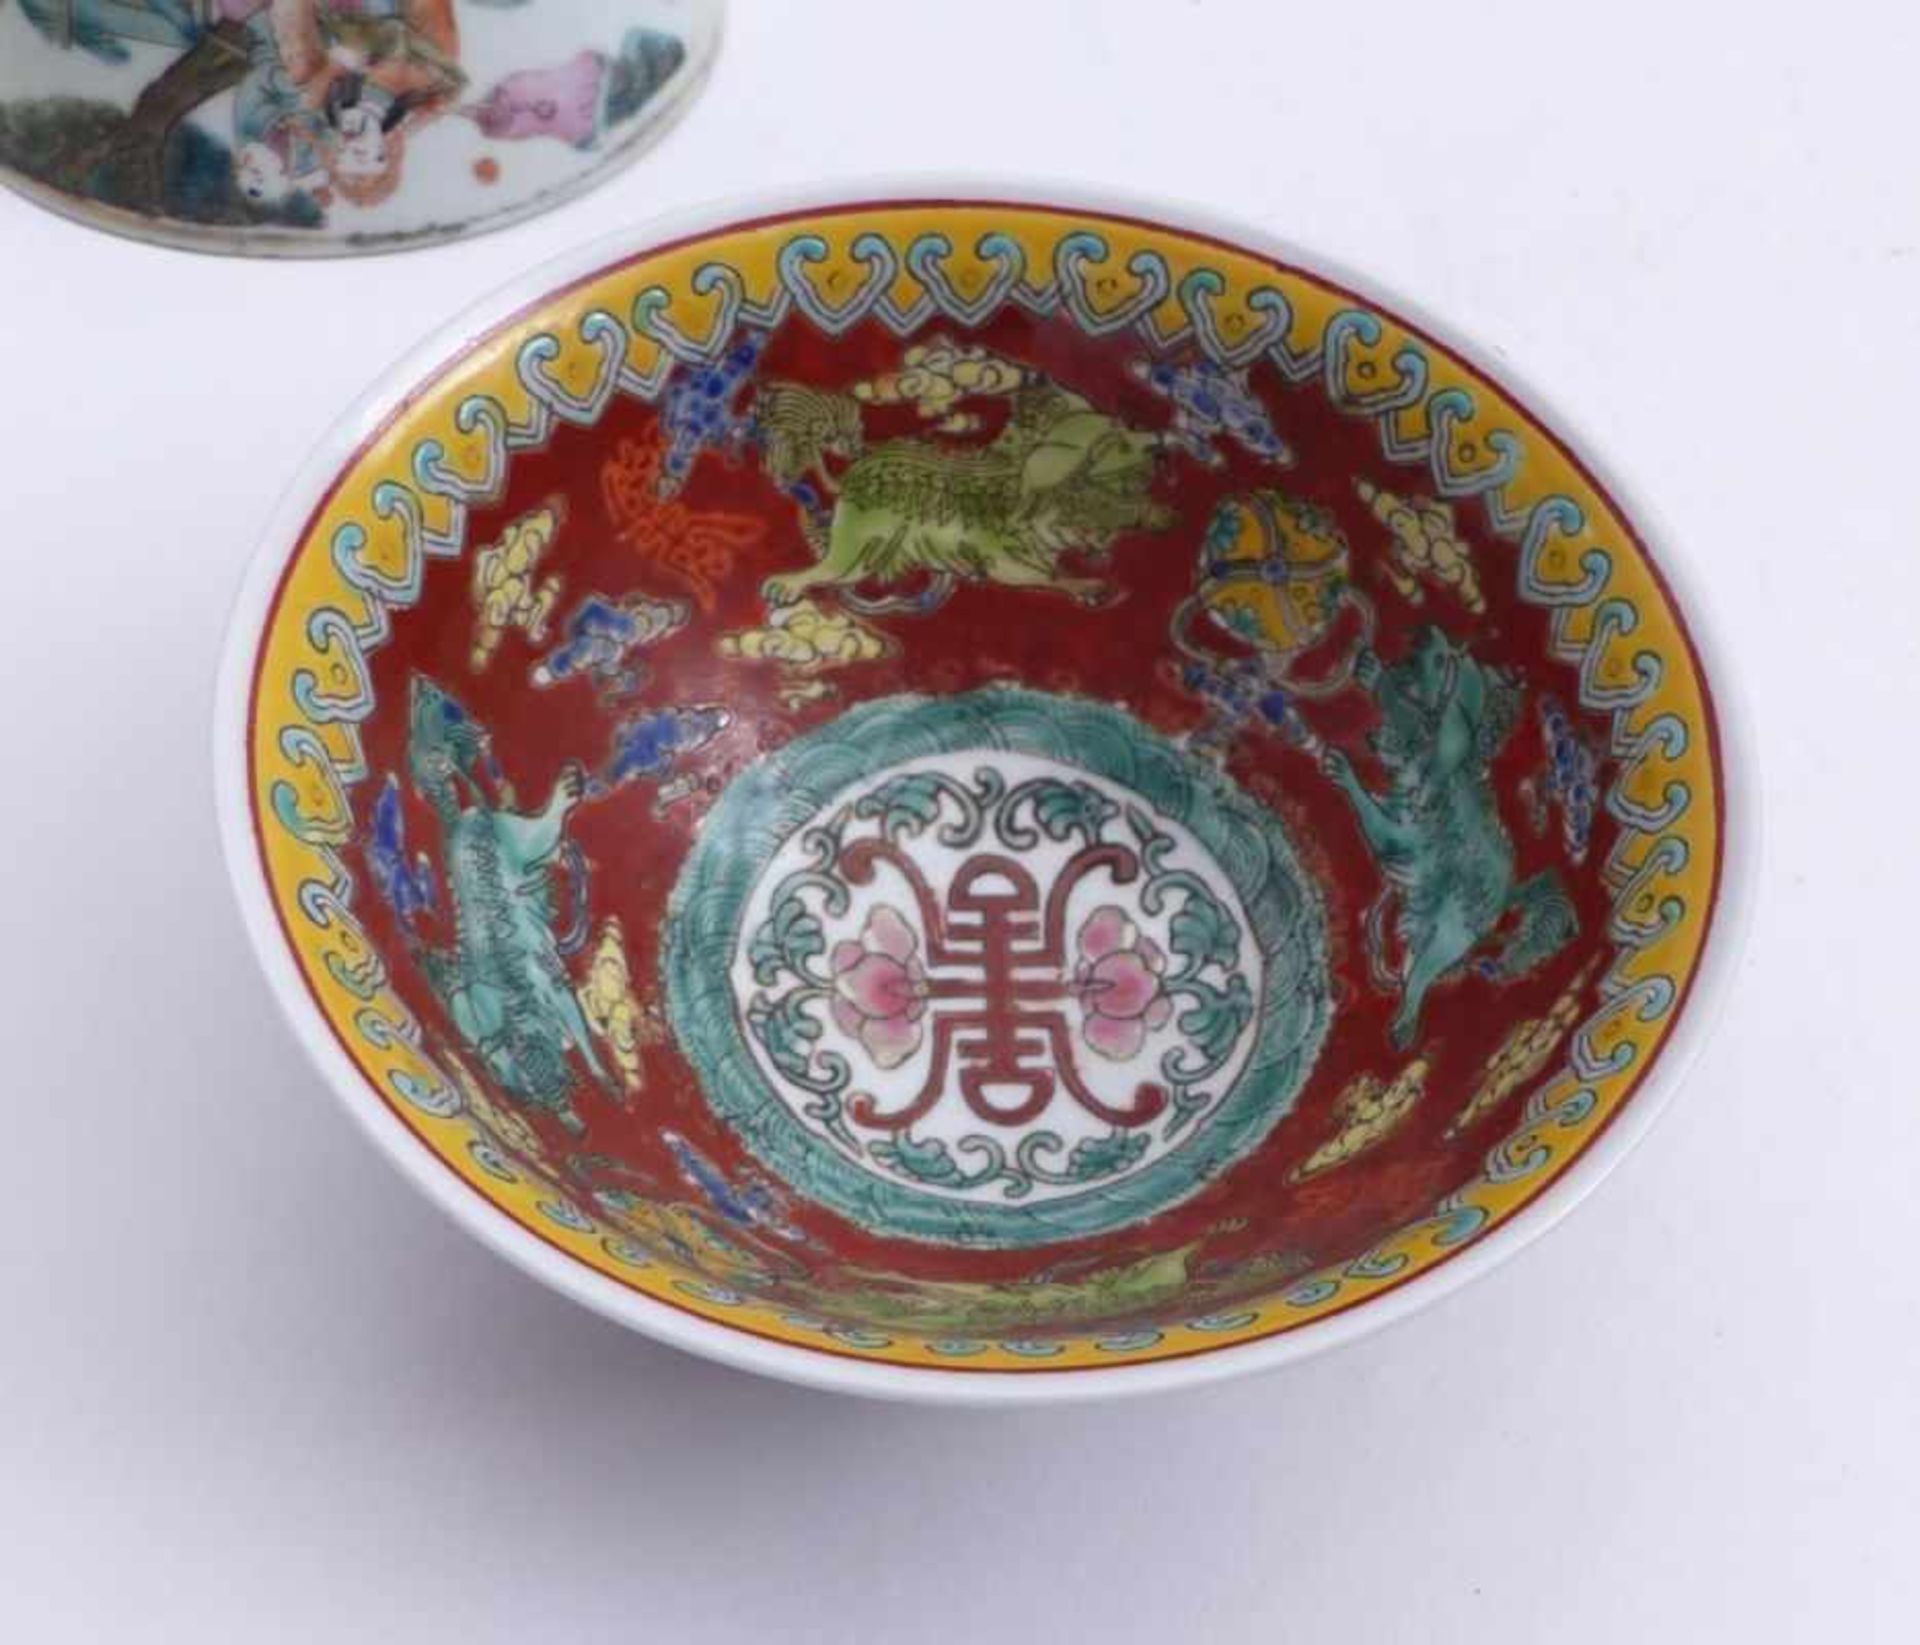 Three cupsChina, Qing Dynasty - 19th c.Decor with Fo dogs and brocade ball on reddish brown - Image 4 of 5